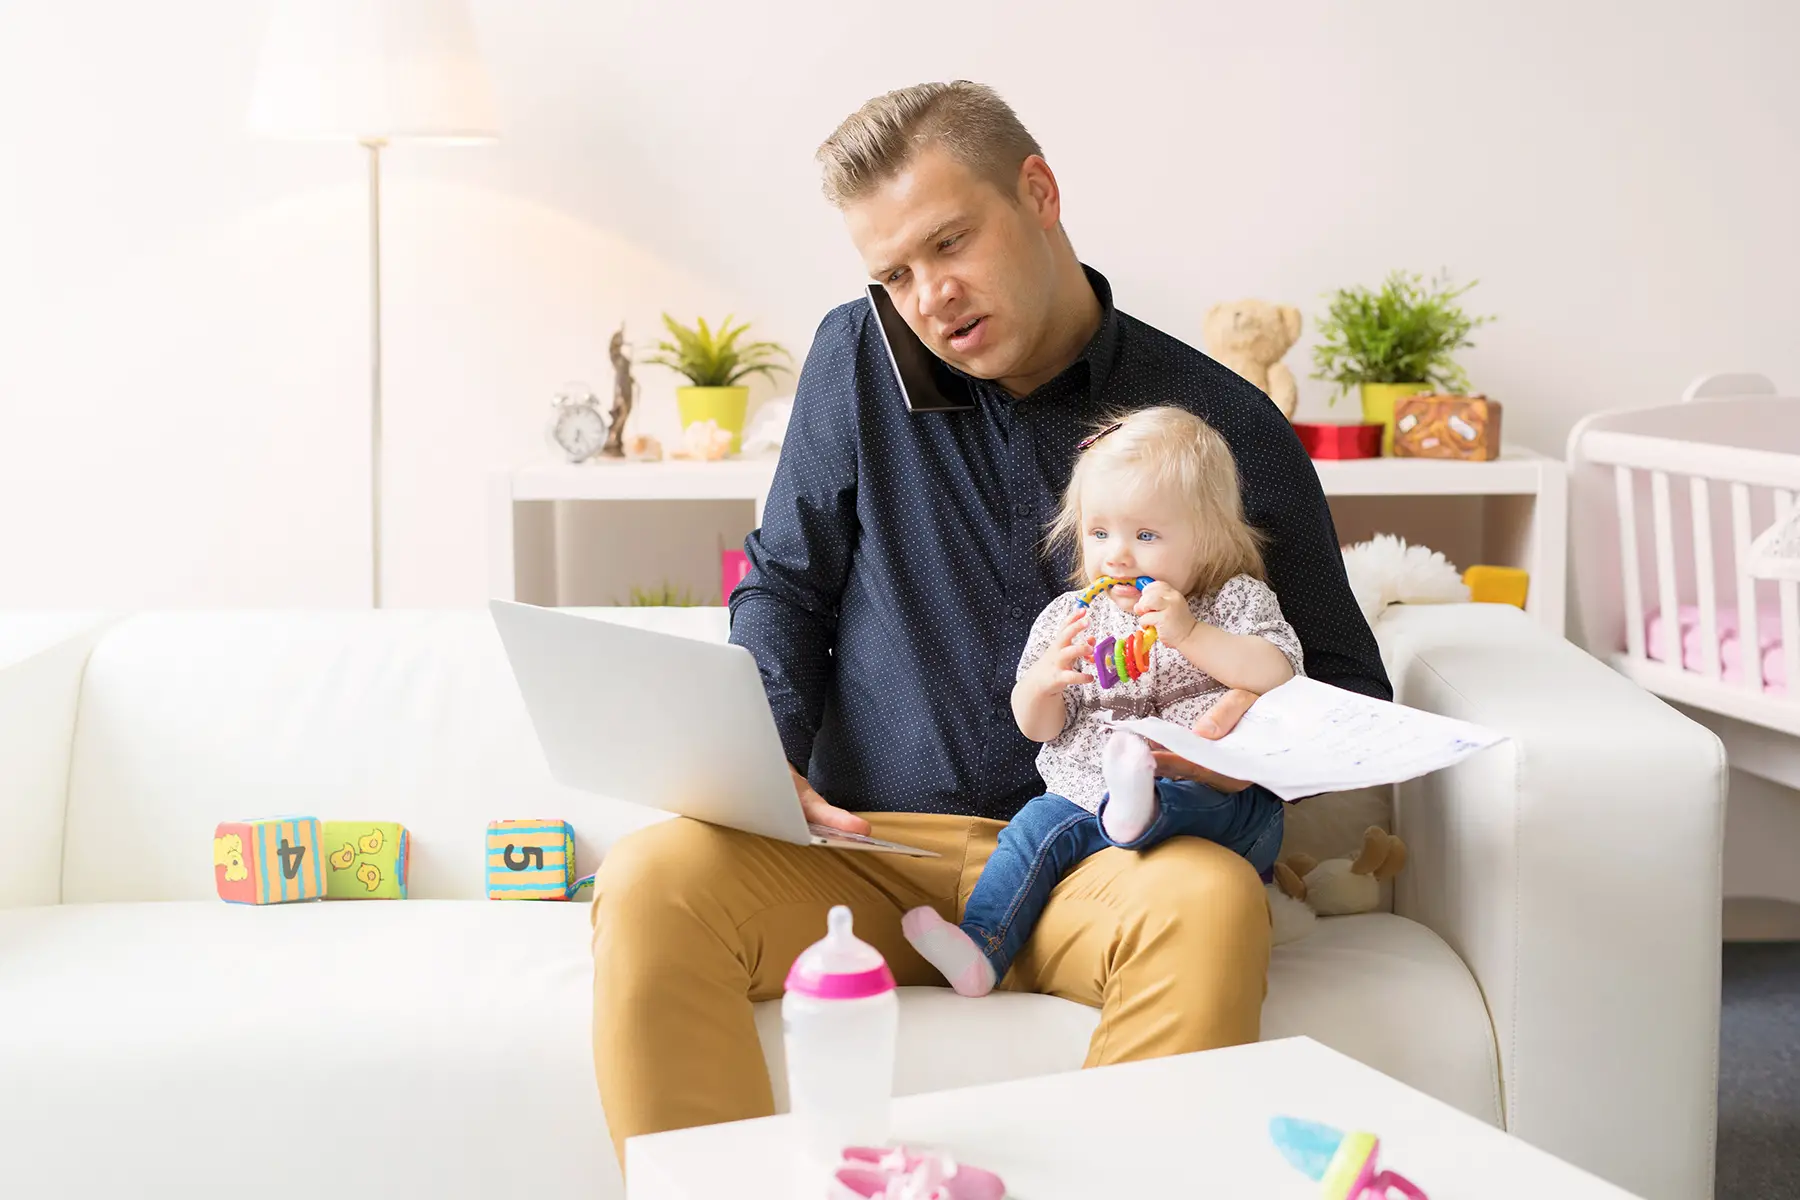 Solo dad applying for a UK parent family visa online while holding toddler